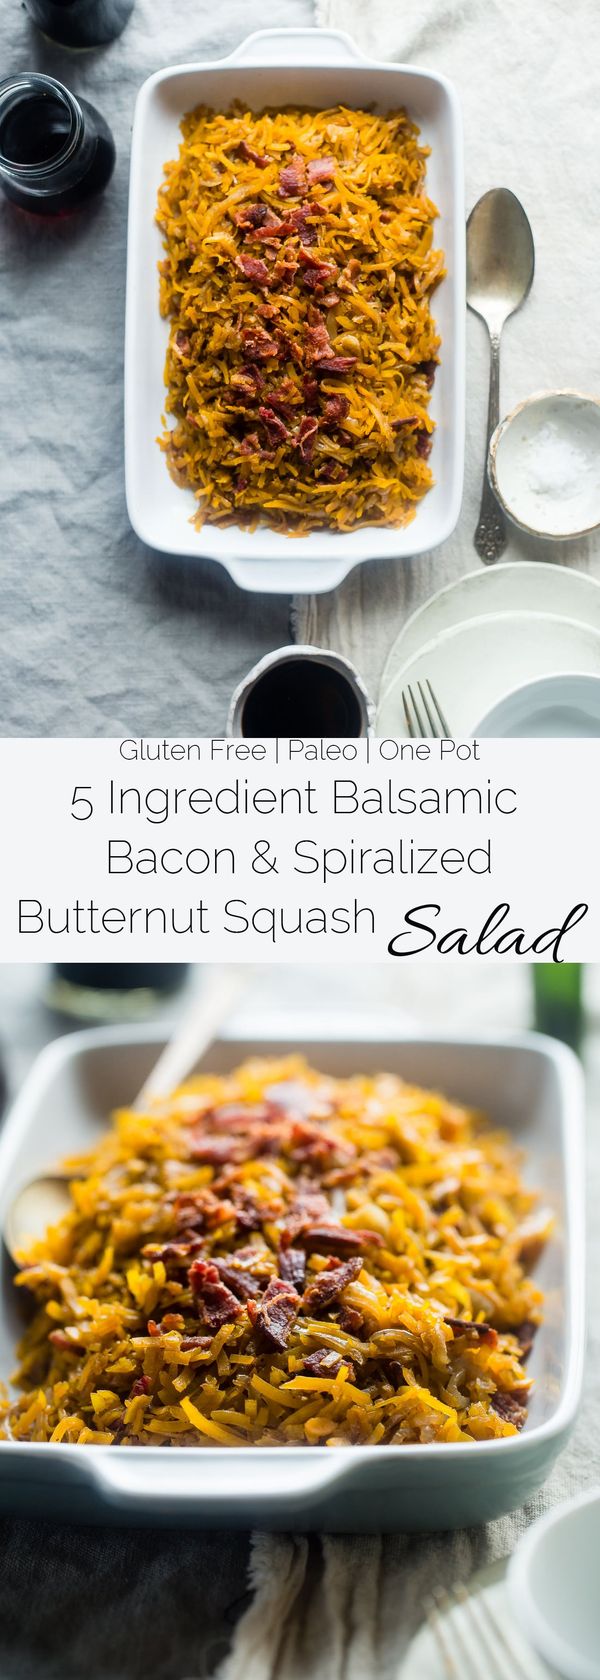 Balsamic Butternut Squash Salad with Bacon